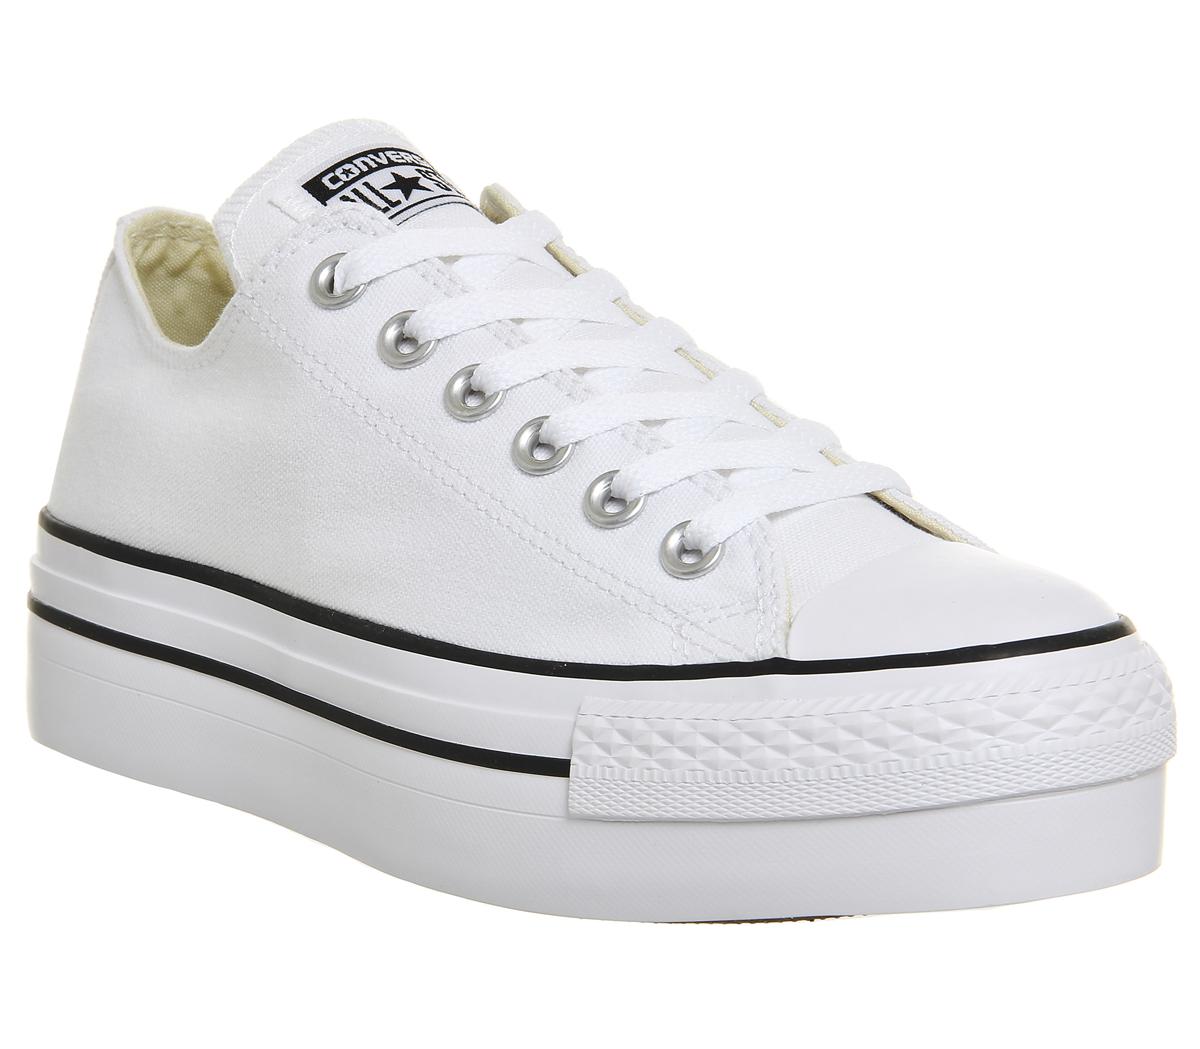 Converse All Star Low Platform White - Hers trainers